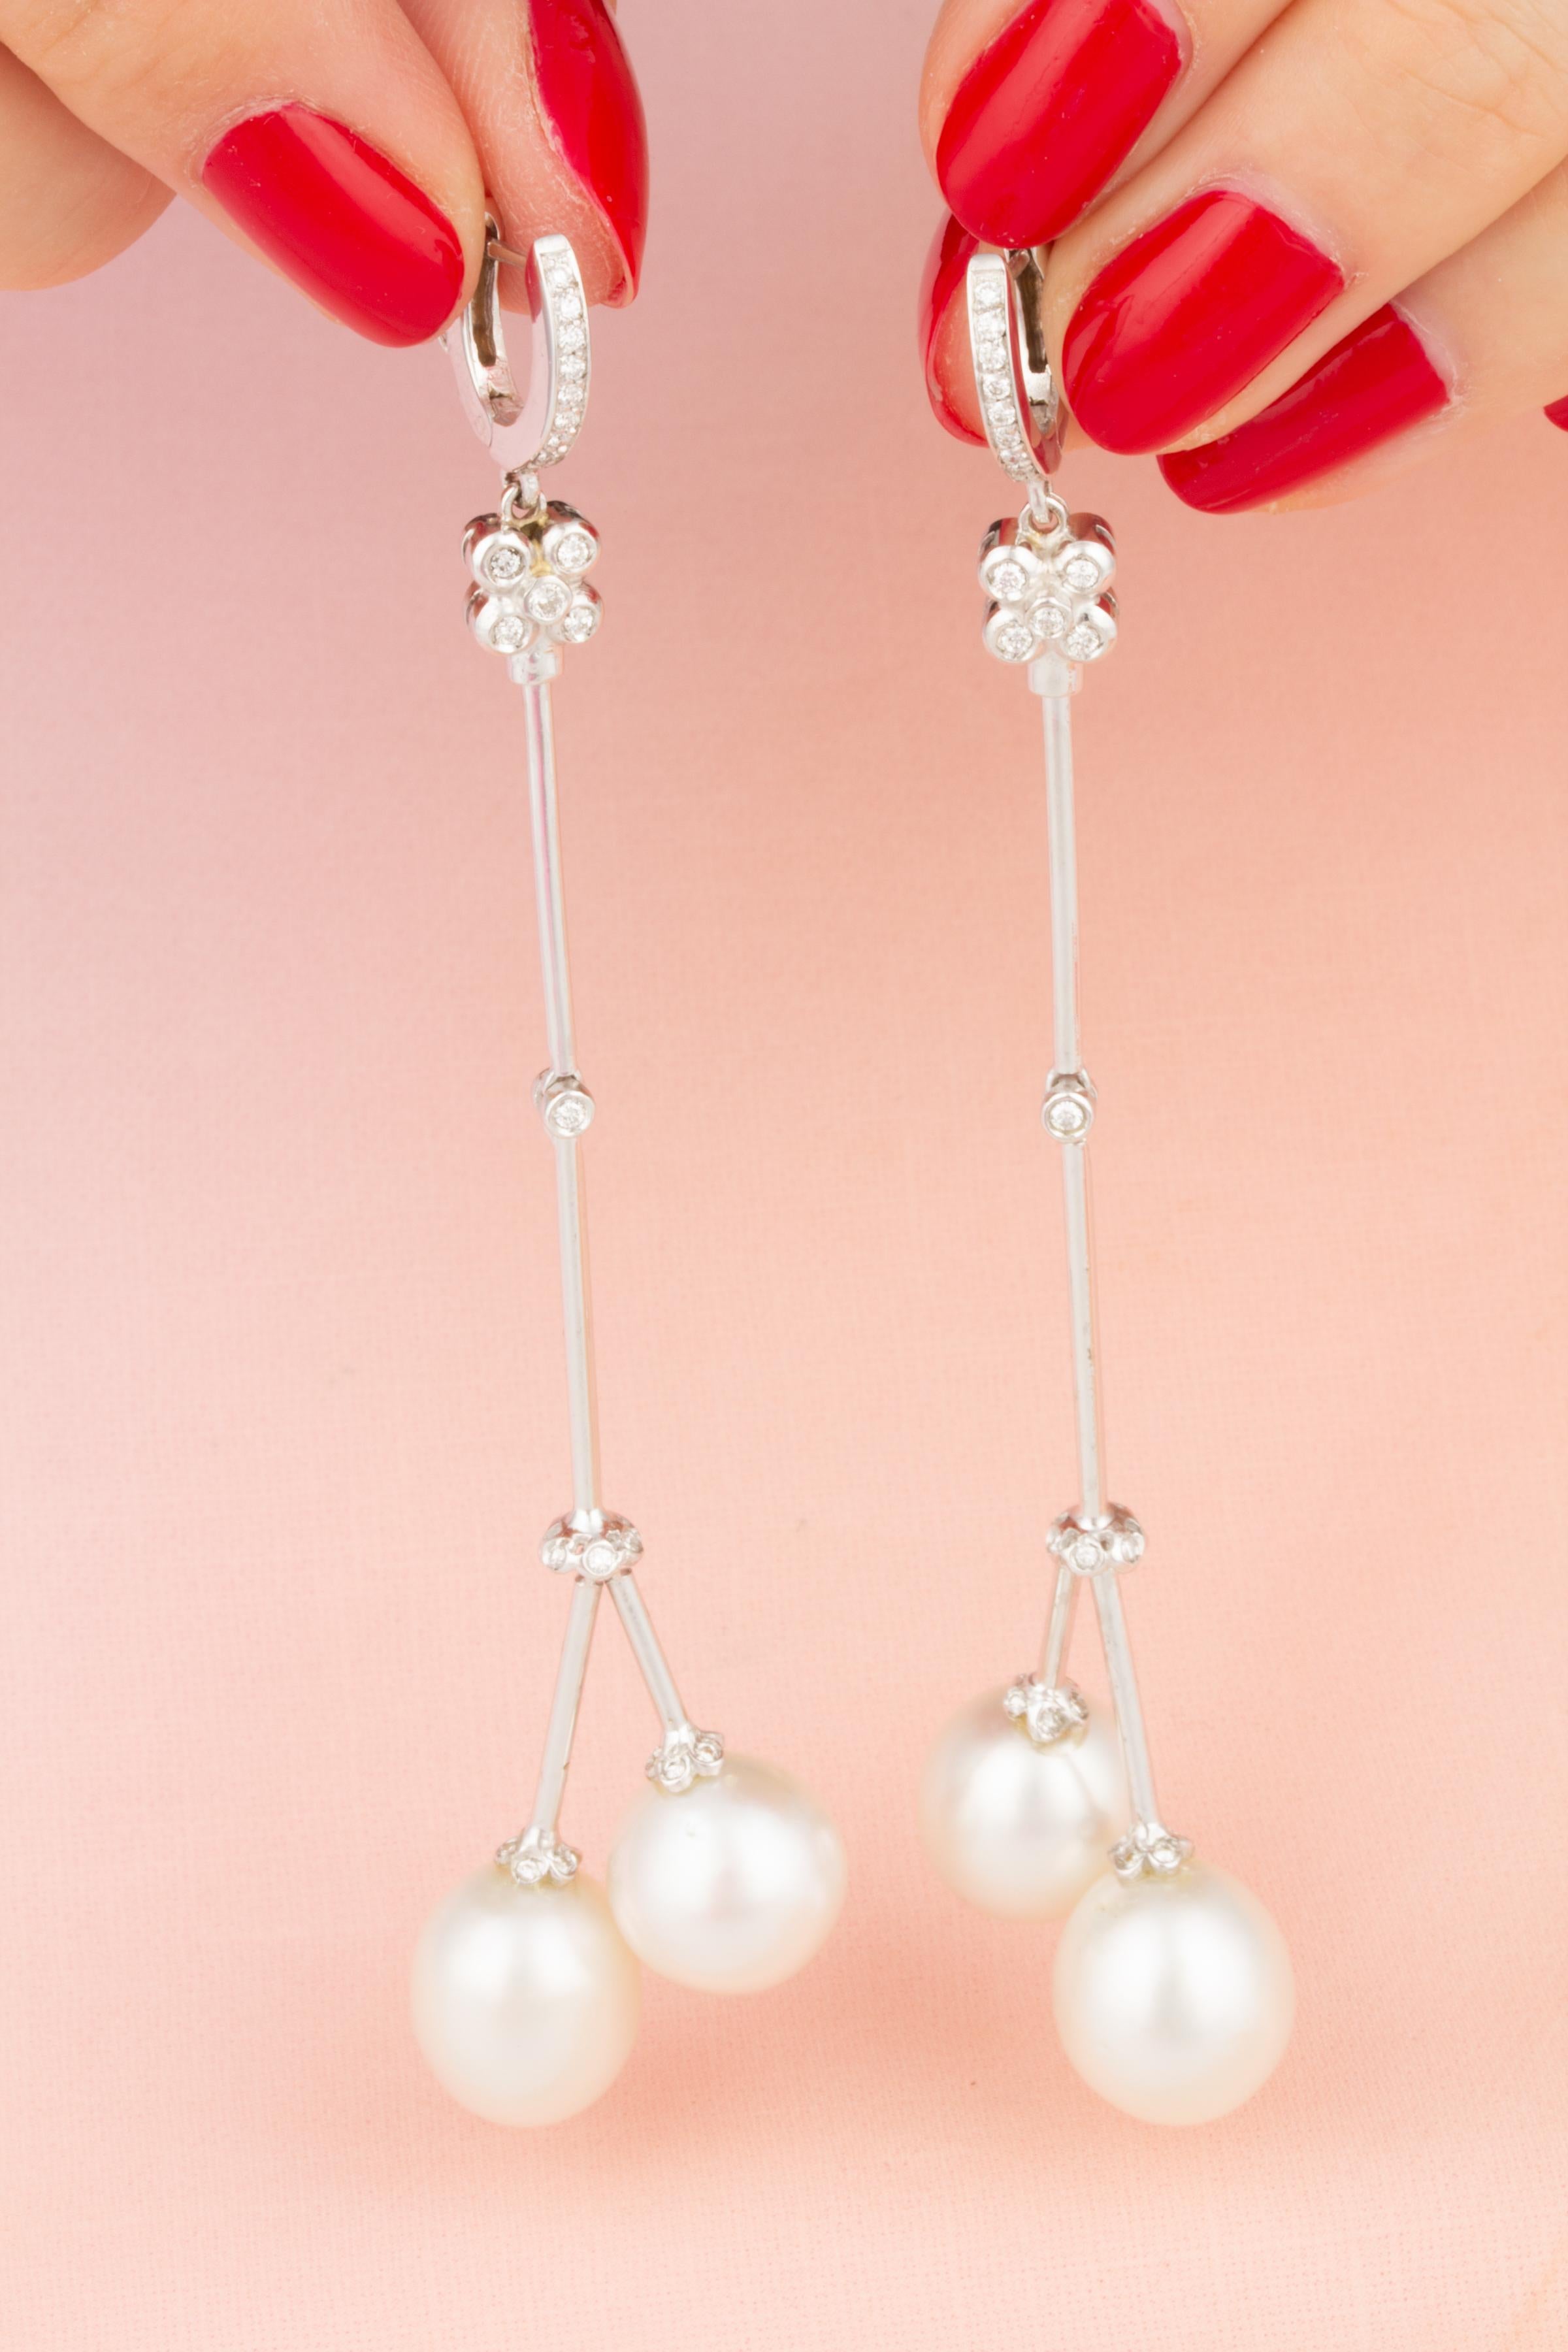 Brilliant Cut Ella Gafter White South Sea Pearl and Diamond Drop Earrings For Sale